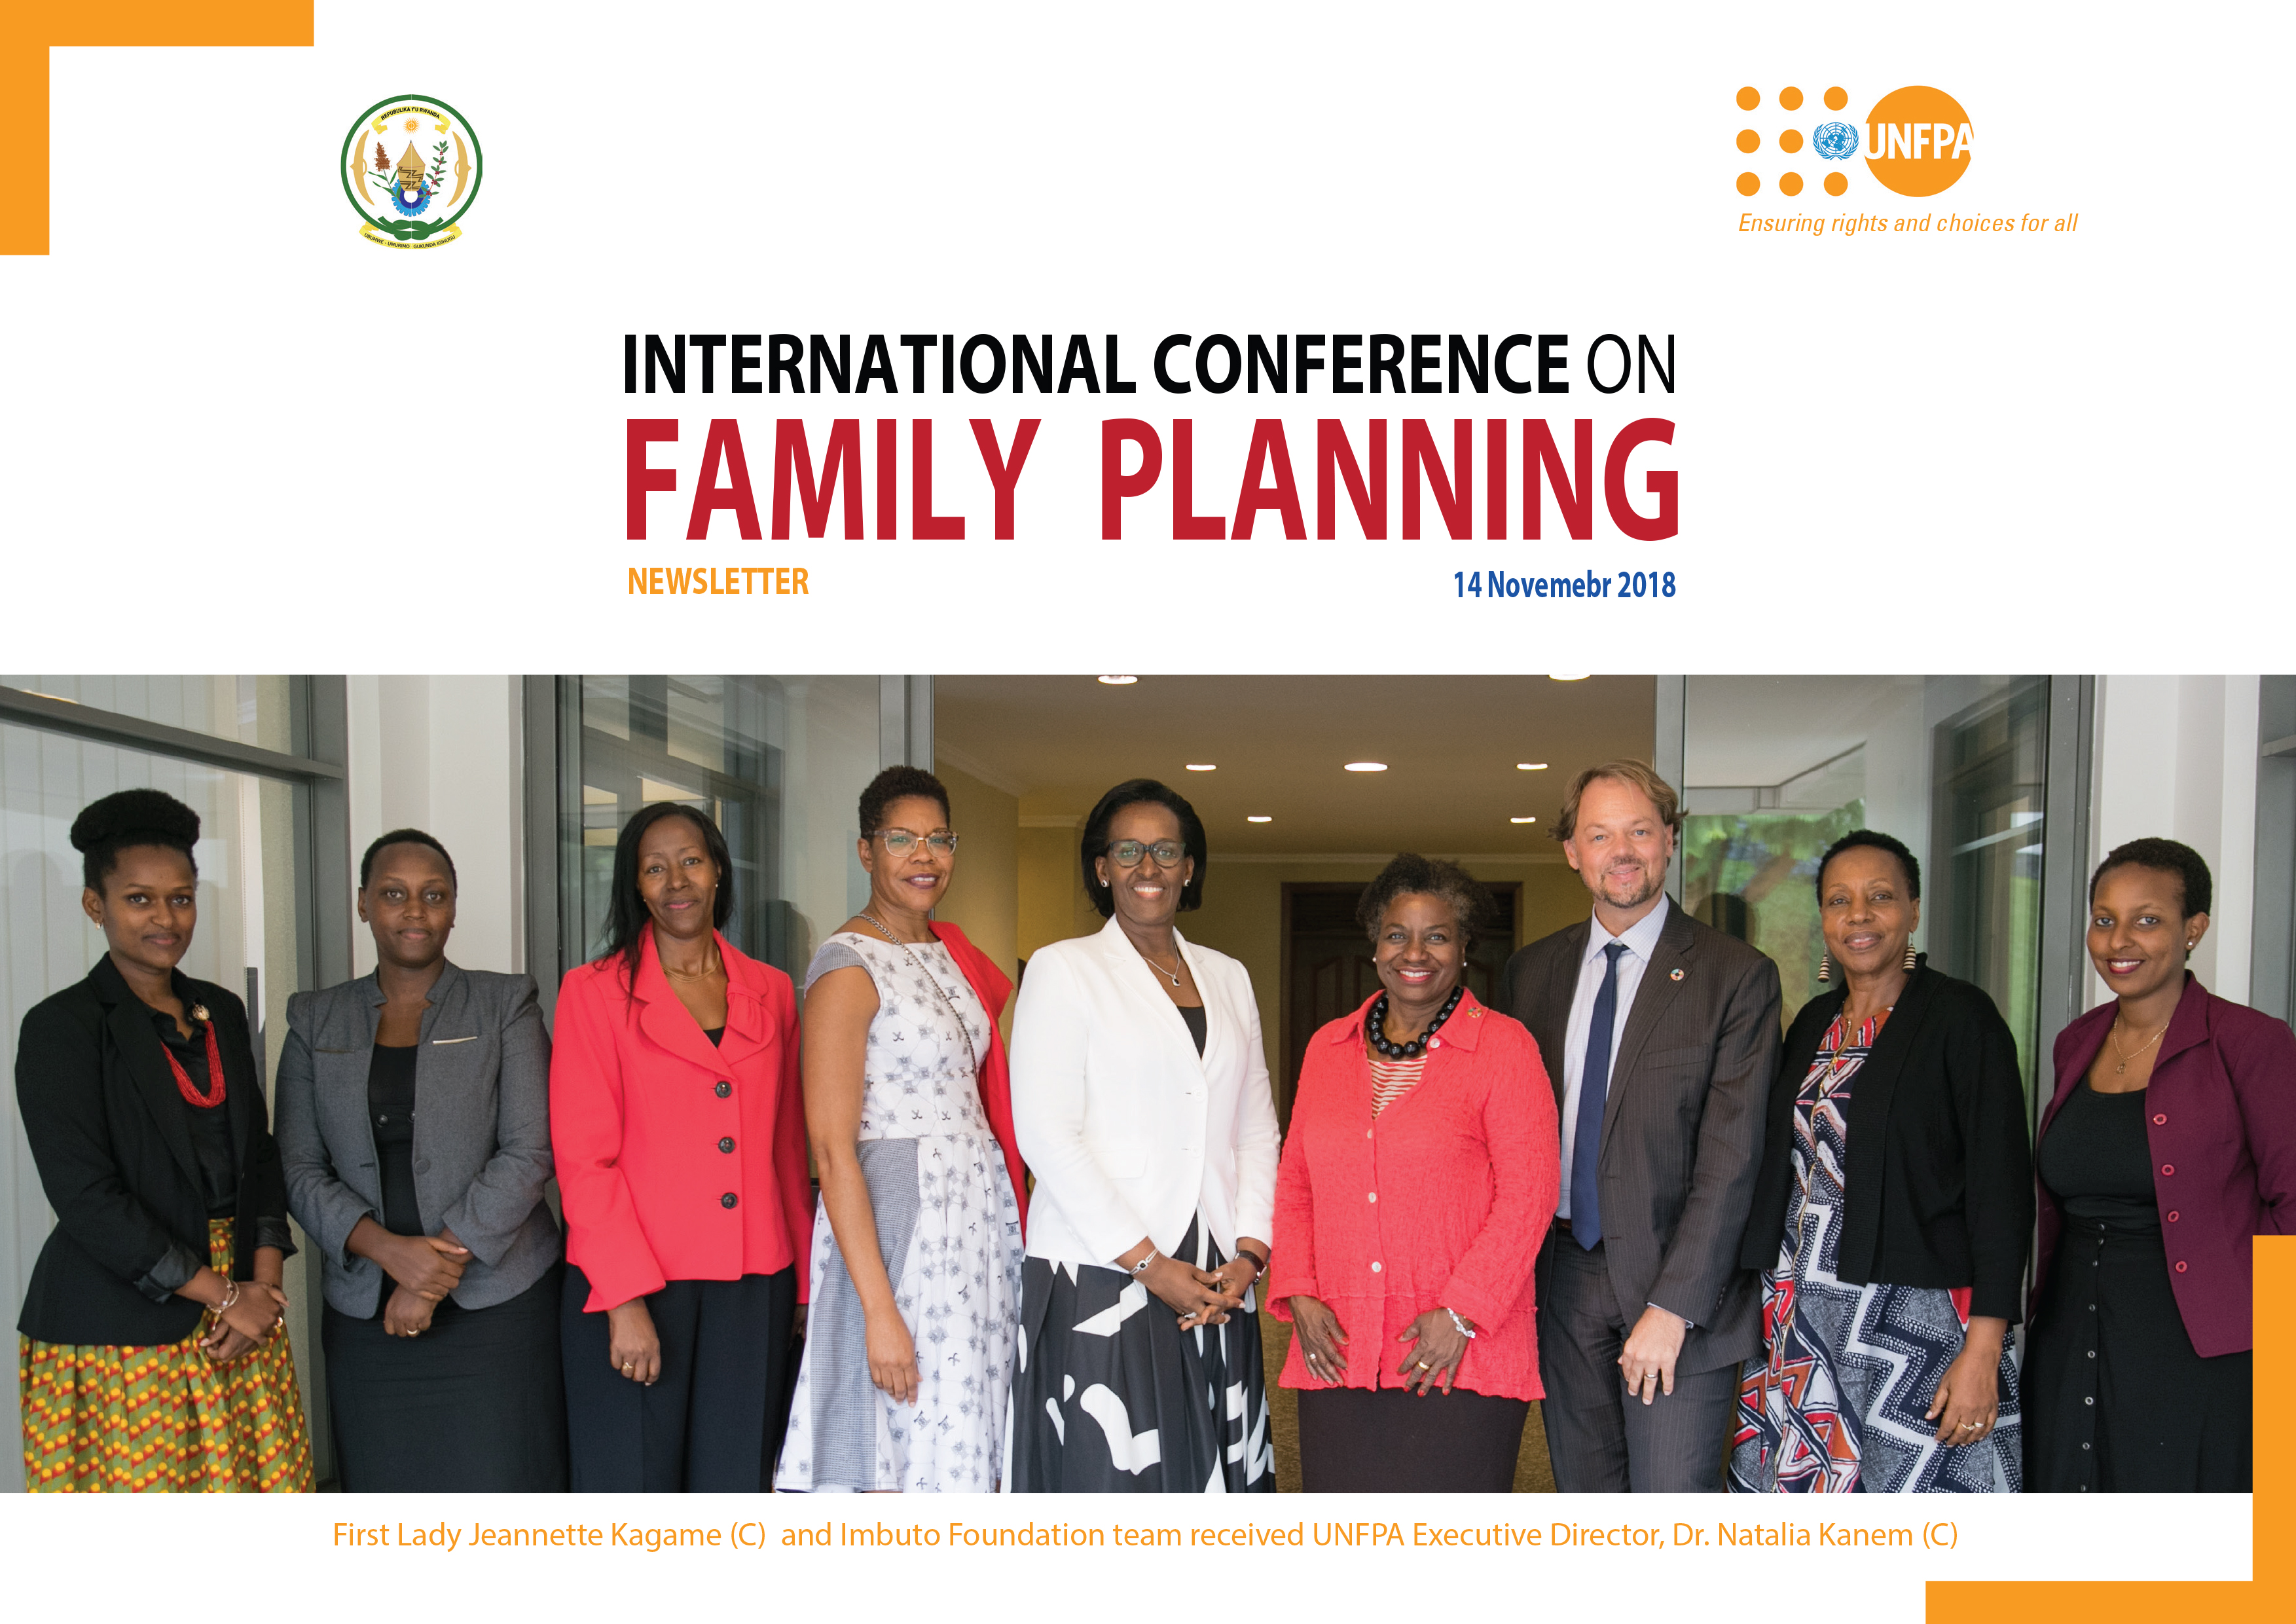 First Lady Jeannette Kagame (C) and Imbuto Foundation team received UNFPA Executive Director, Dr. Natalia Kanem (C)